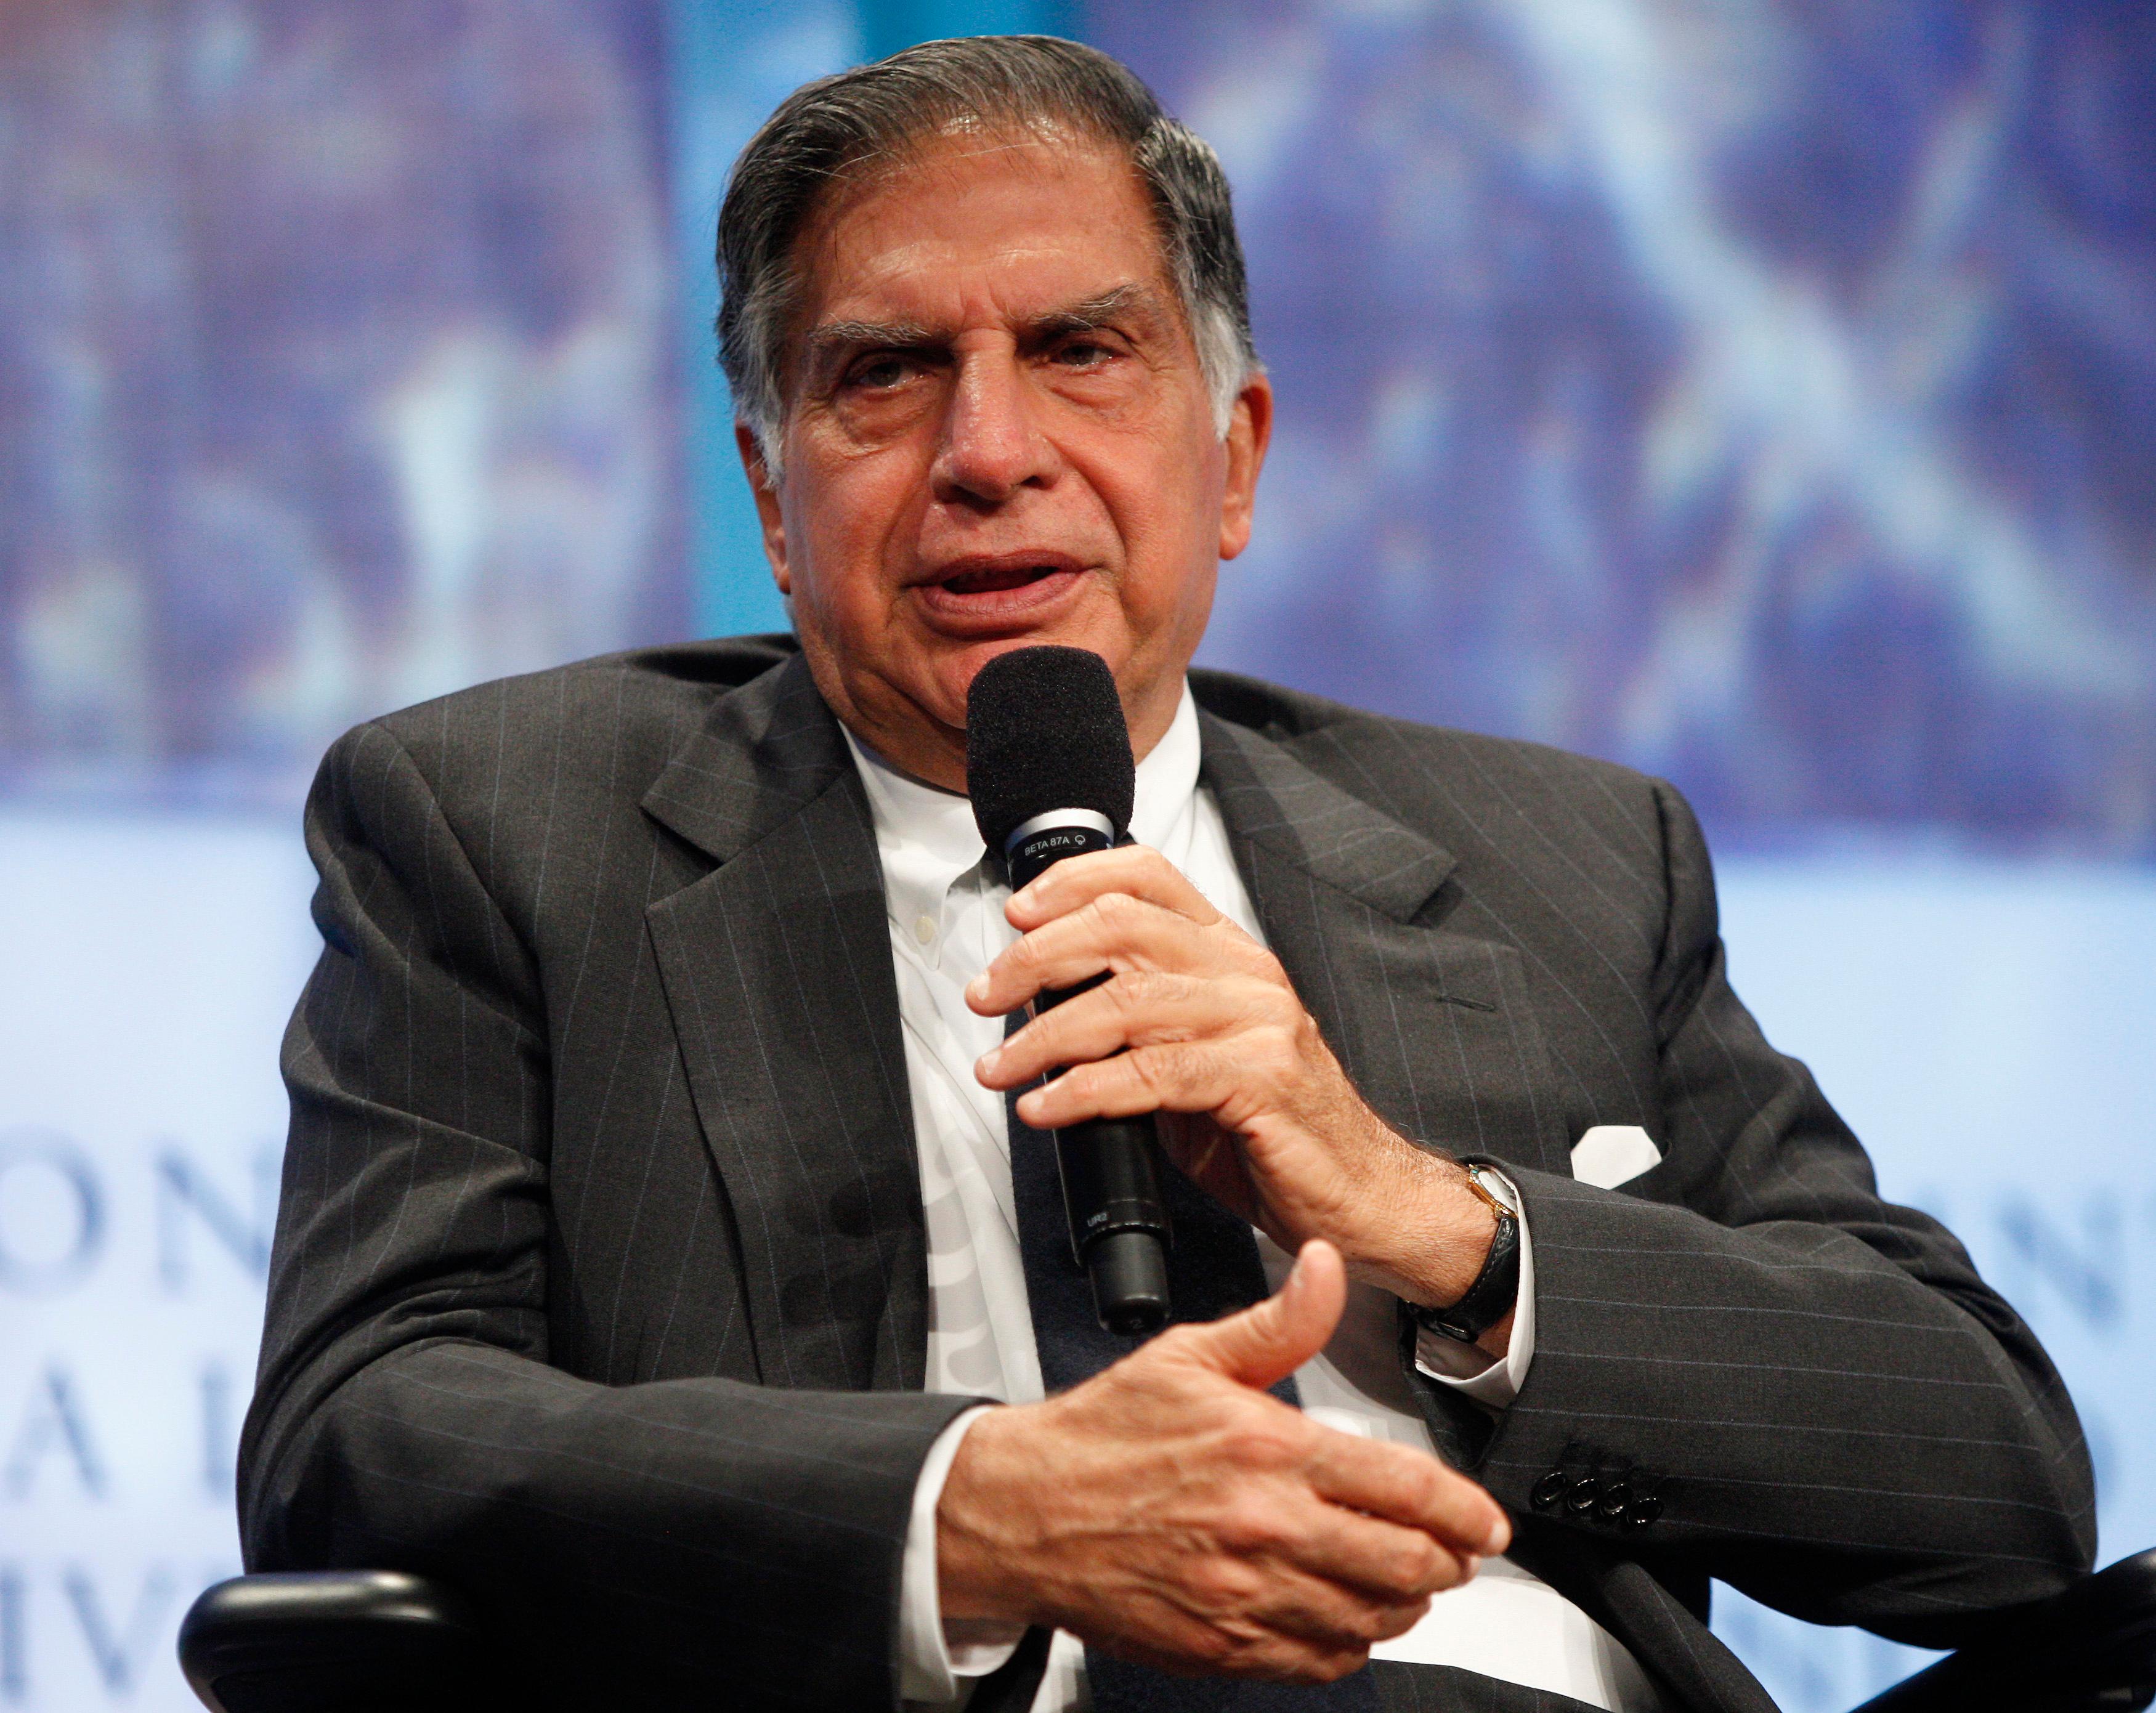 Singapore-based VC firm Jungle Ventures appoints Ratan Tata as special adviser